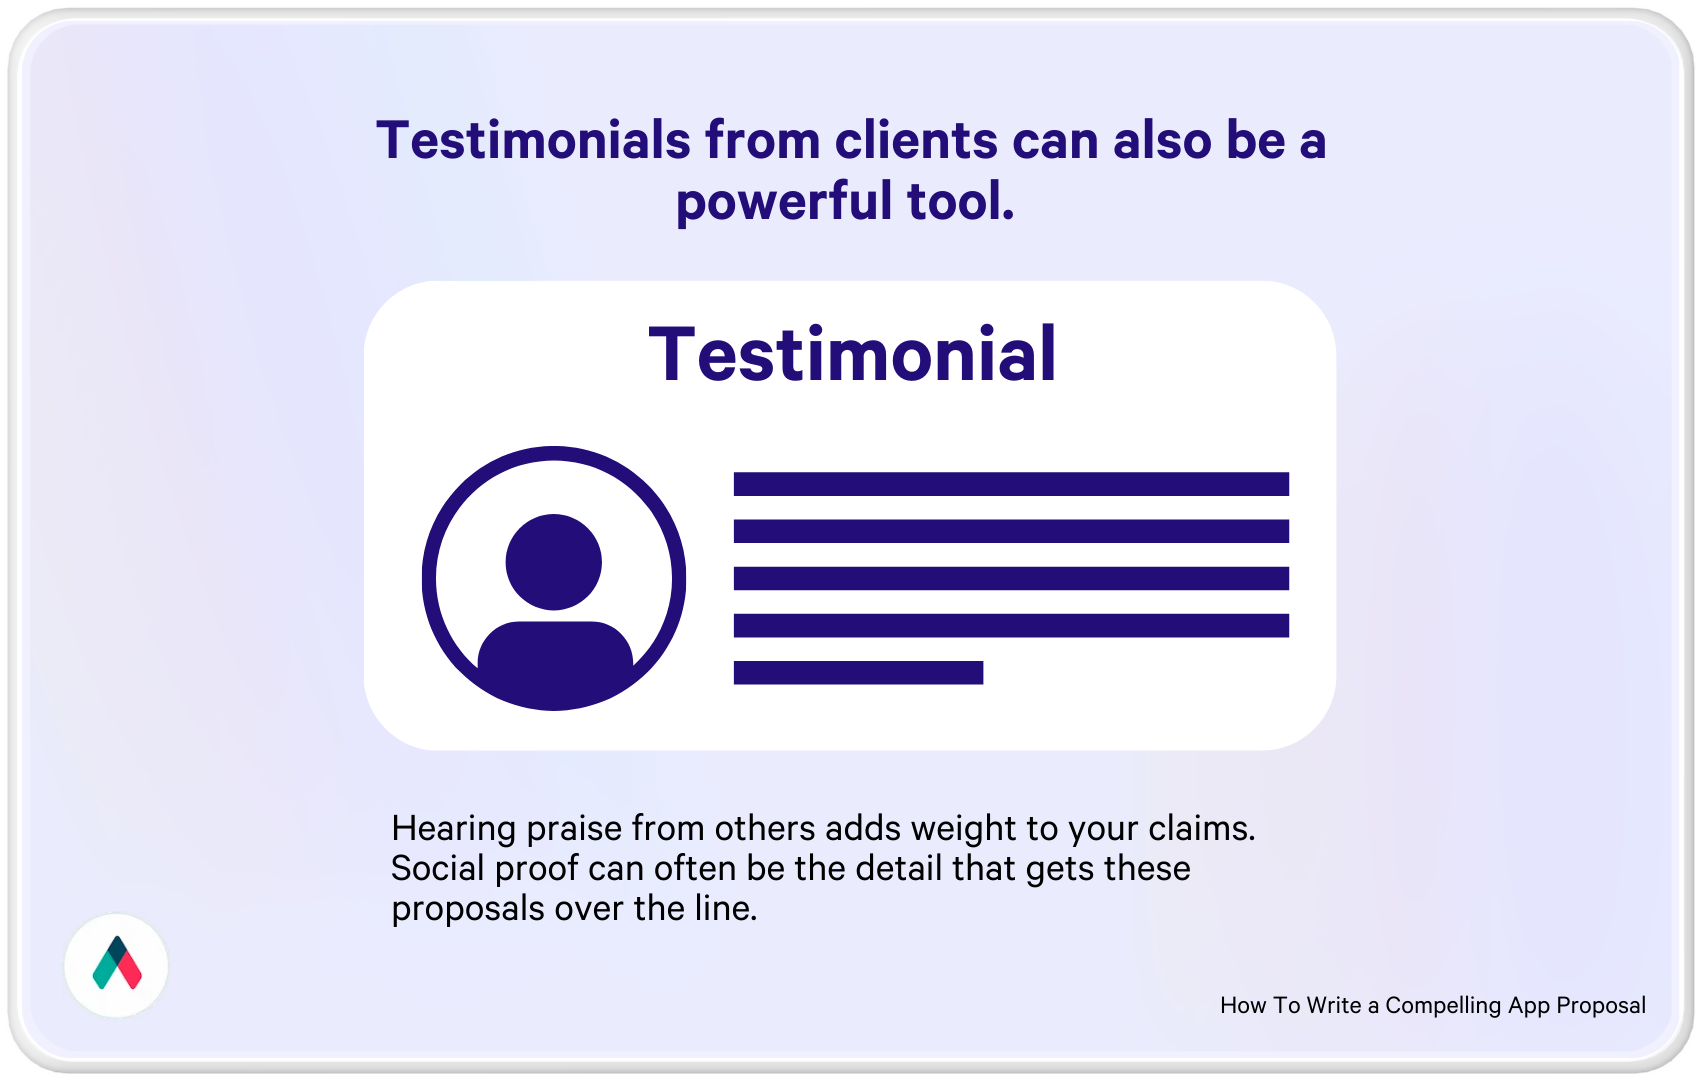 testimonials from clients can also be a powerful tool